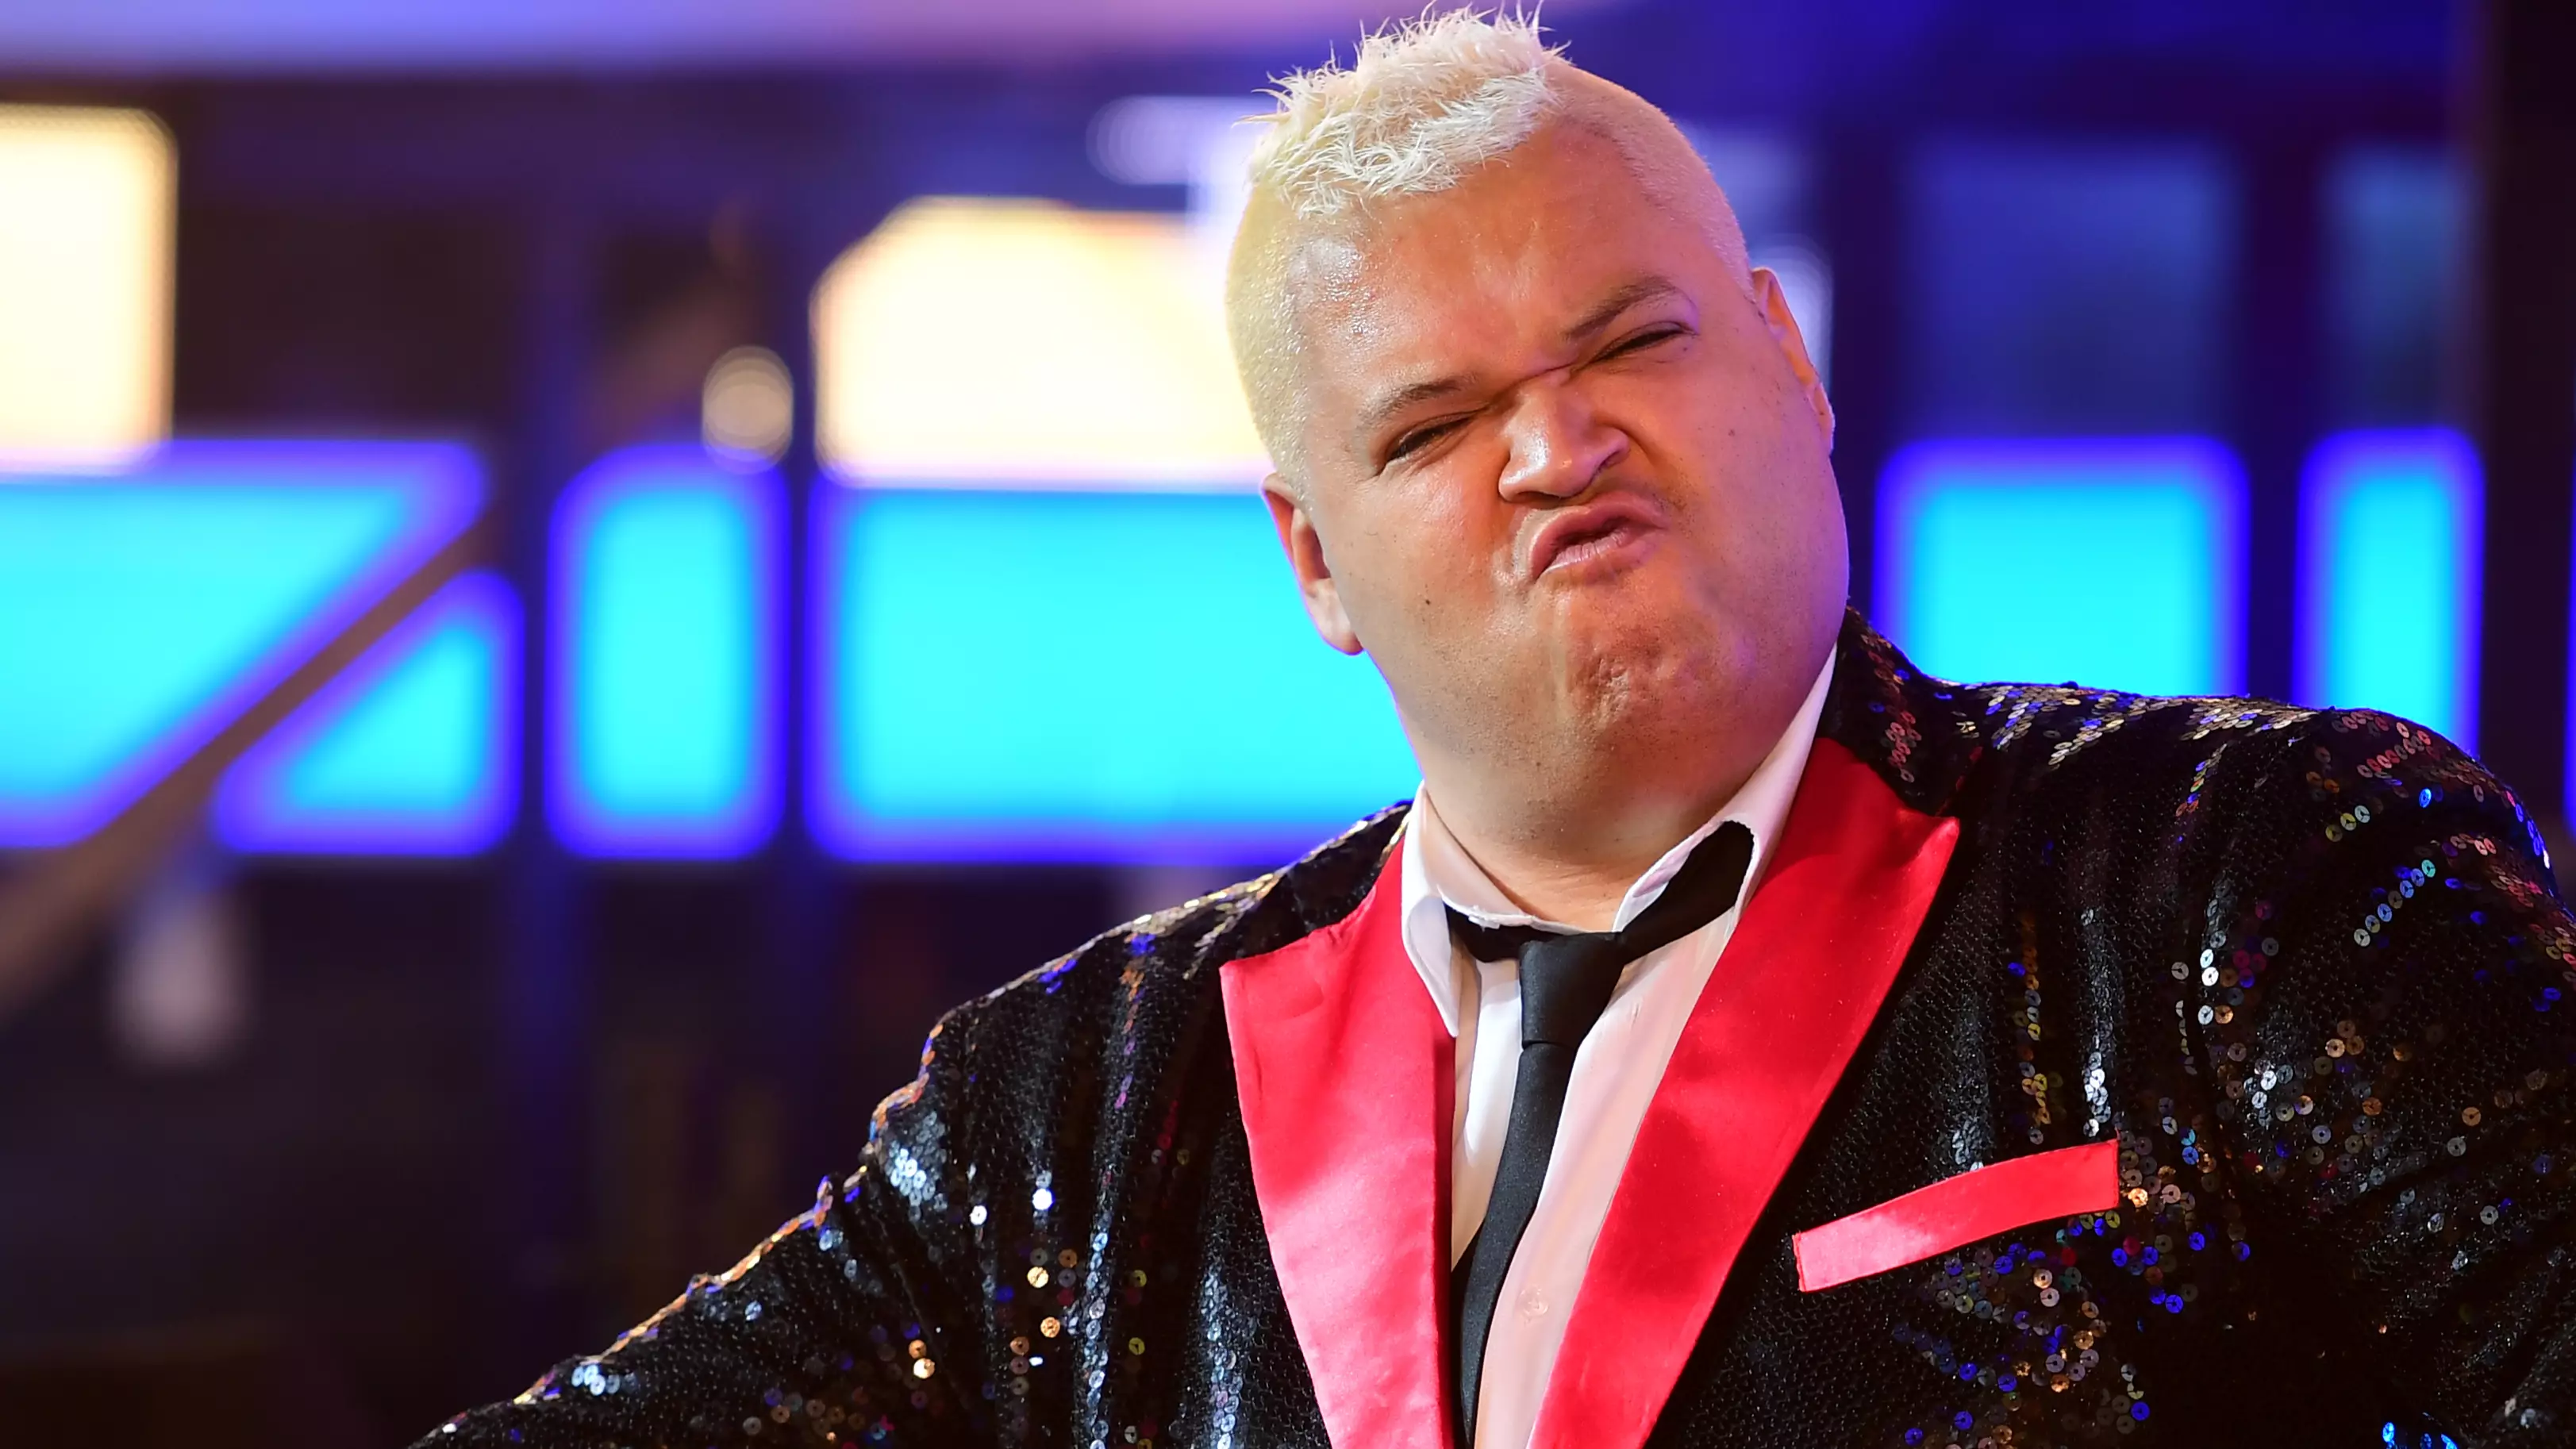 Celebrity Big Brother Star Heavy D Has Died, Aged 43